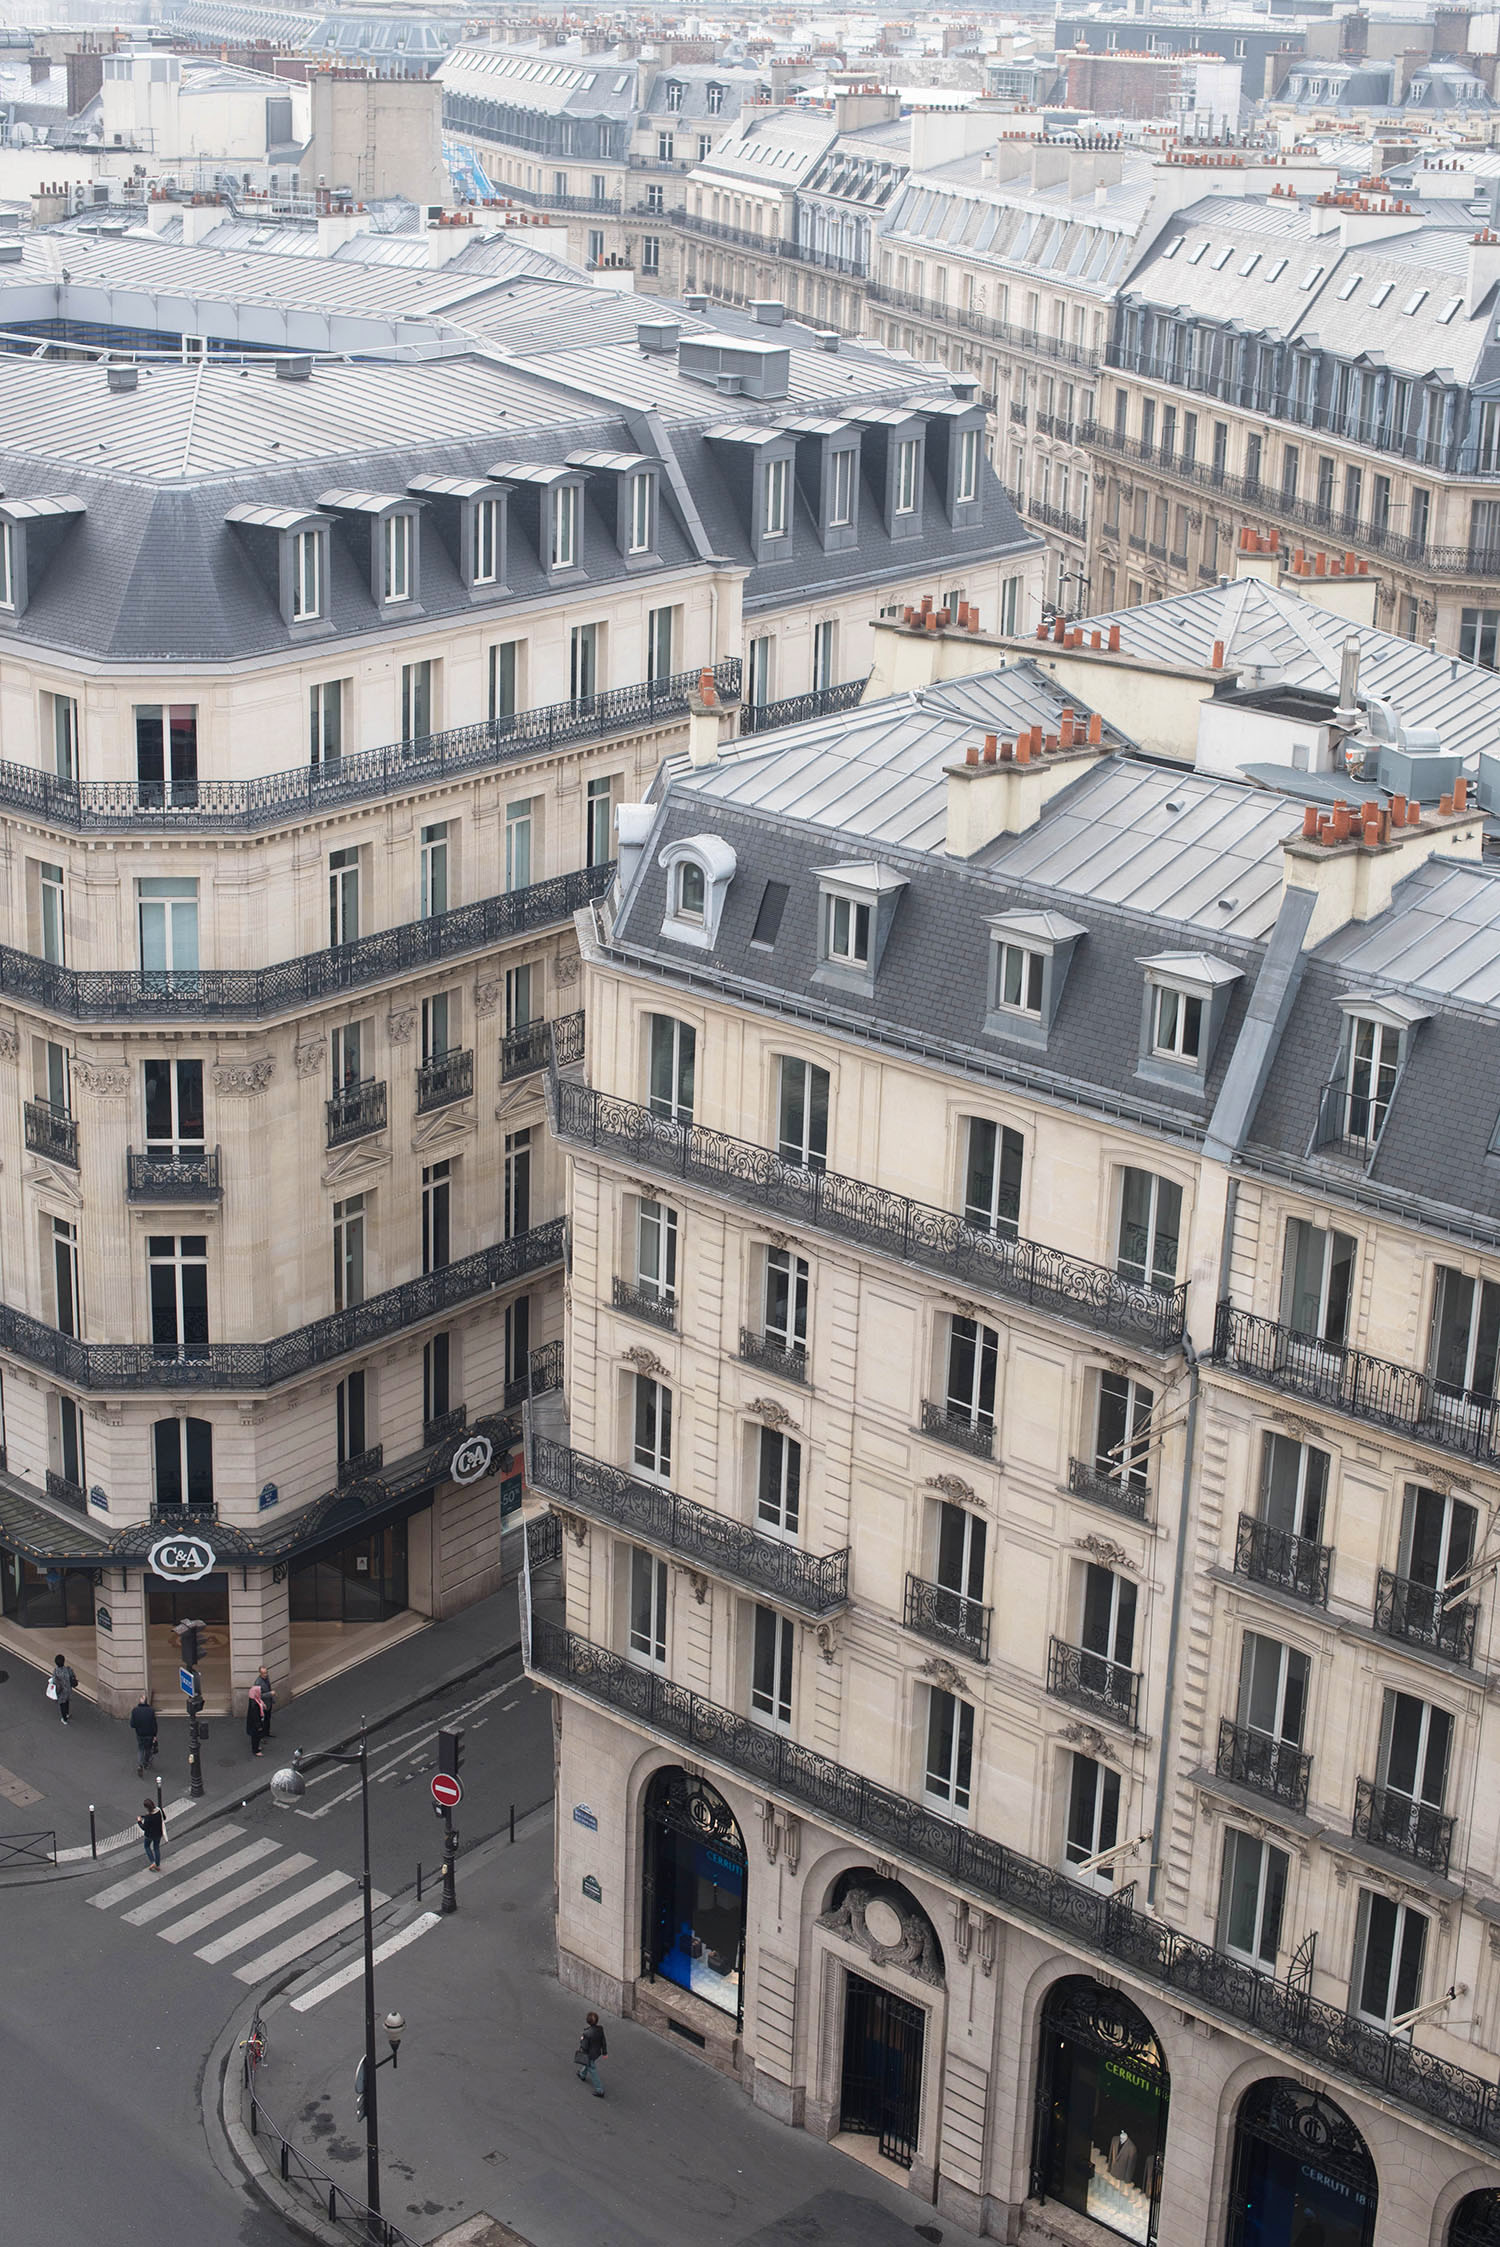 The rooftops of Paris near the Opera Garnier seen from above, as captured by travel blogger Cee Fardoe of Coco & Vera